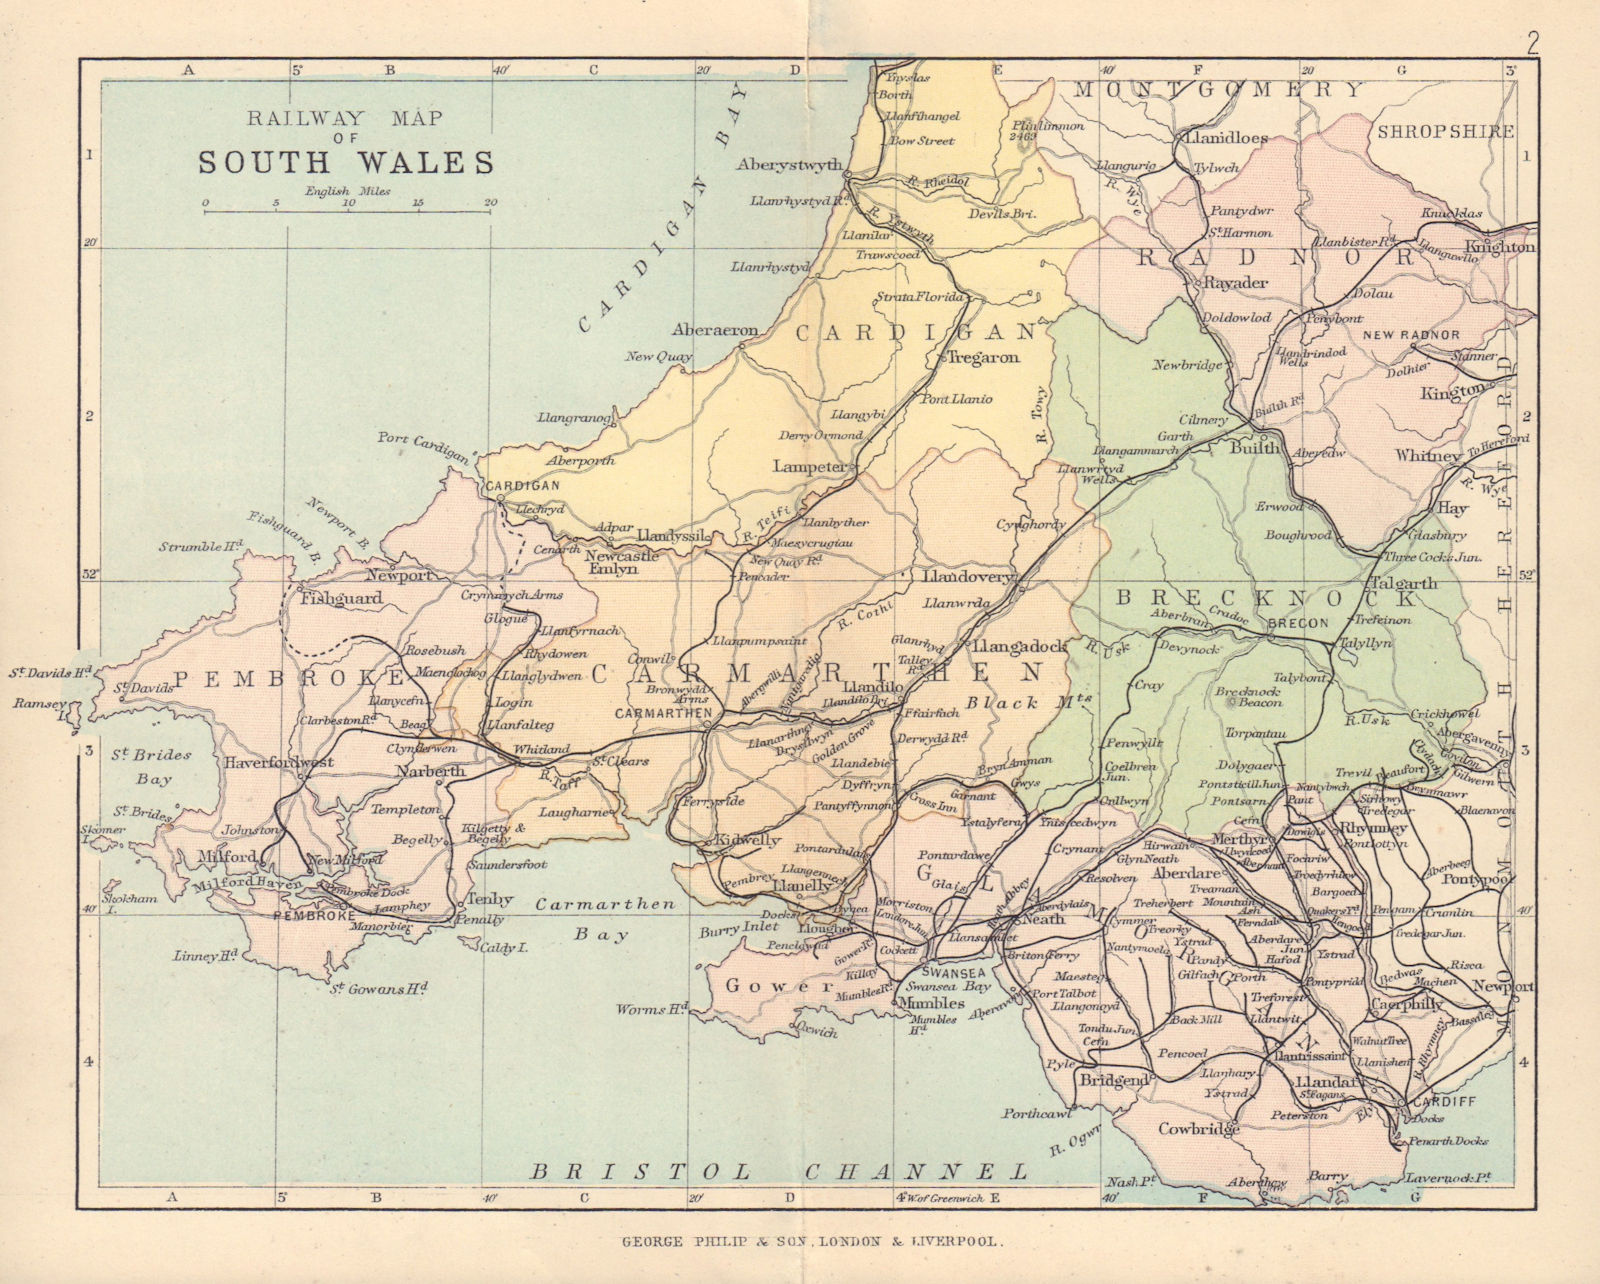 WALES Railway Map of South Wales BARTHOLOMEW 1890 old antique plan chart